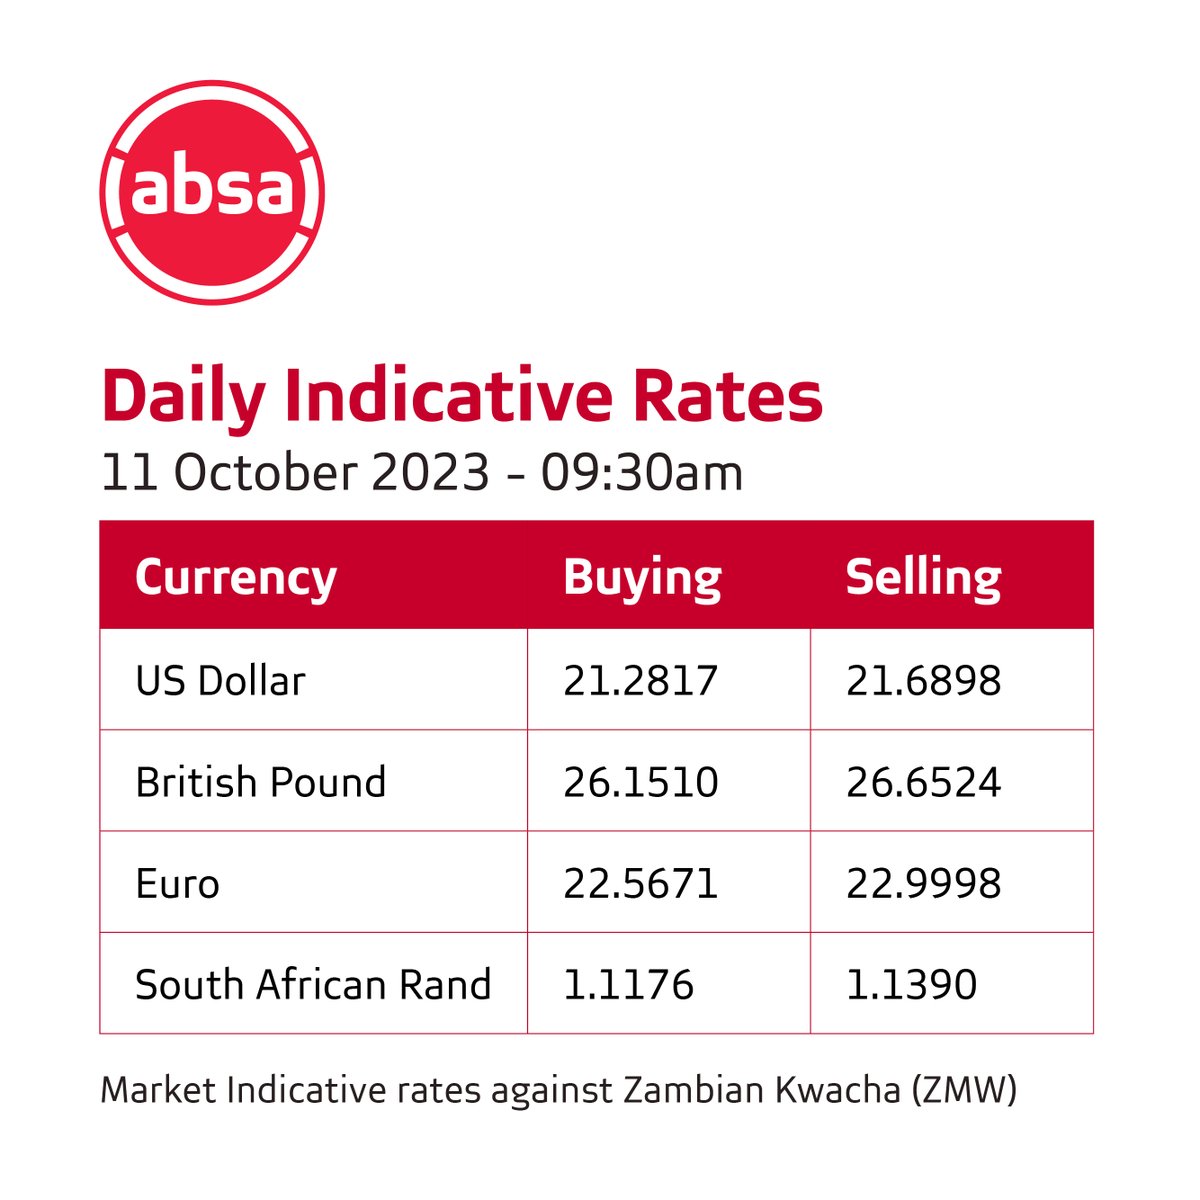 Today's forex update. Be advised that rates are indicative and may change at short notice depending on market conditions